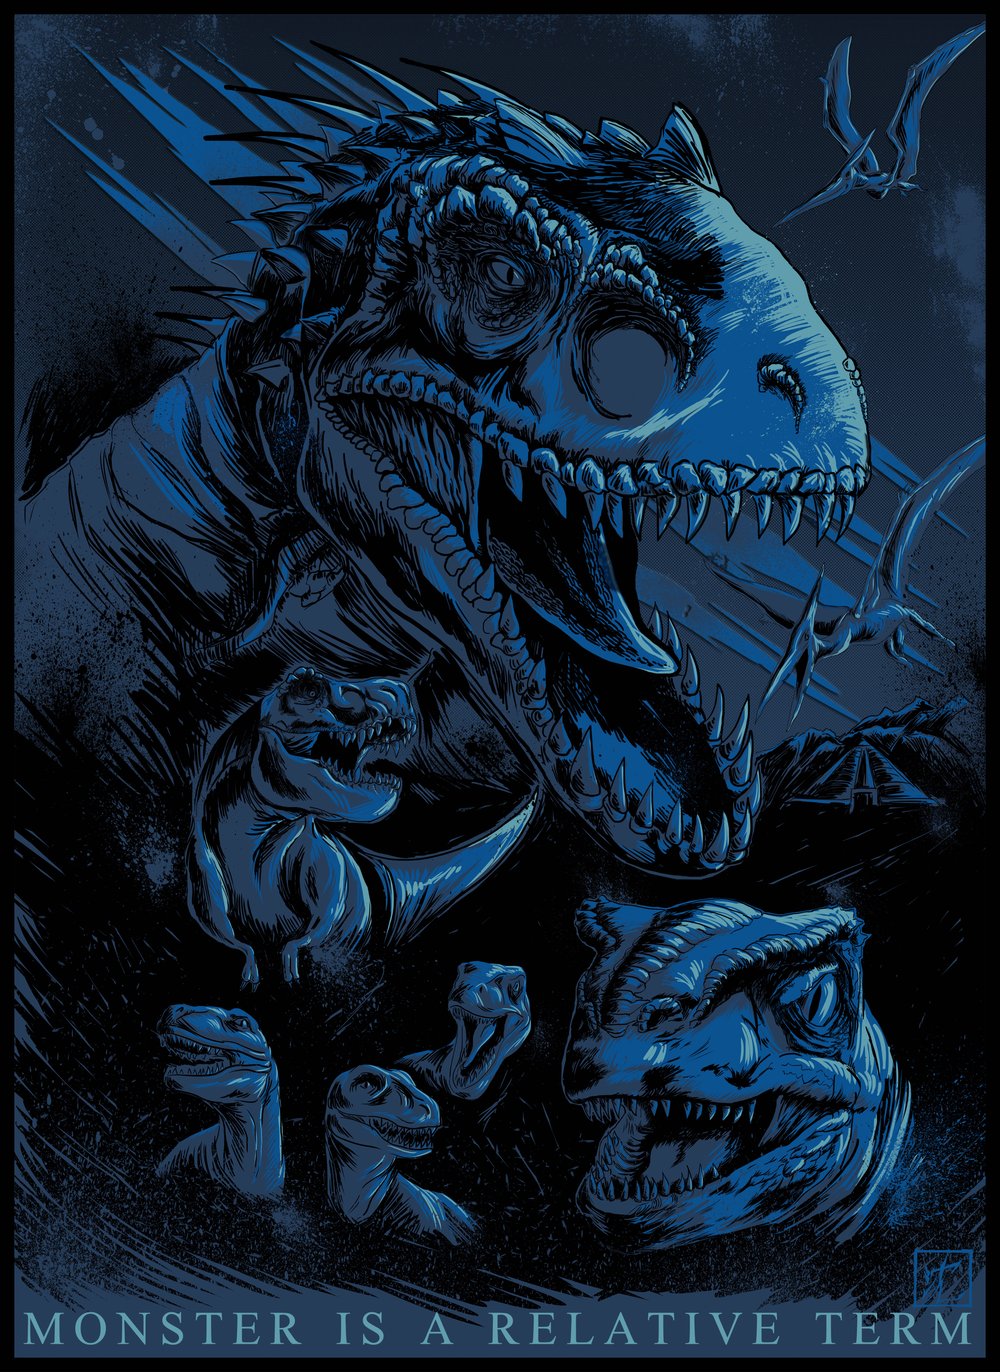 Image of Jurassic World coloured A3 print.